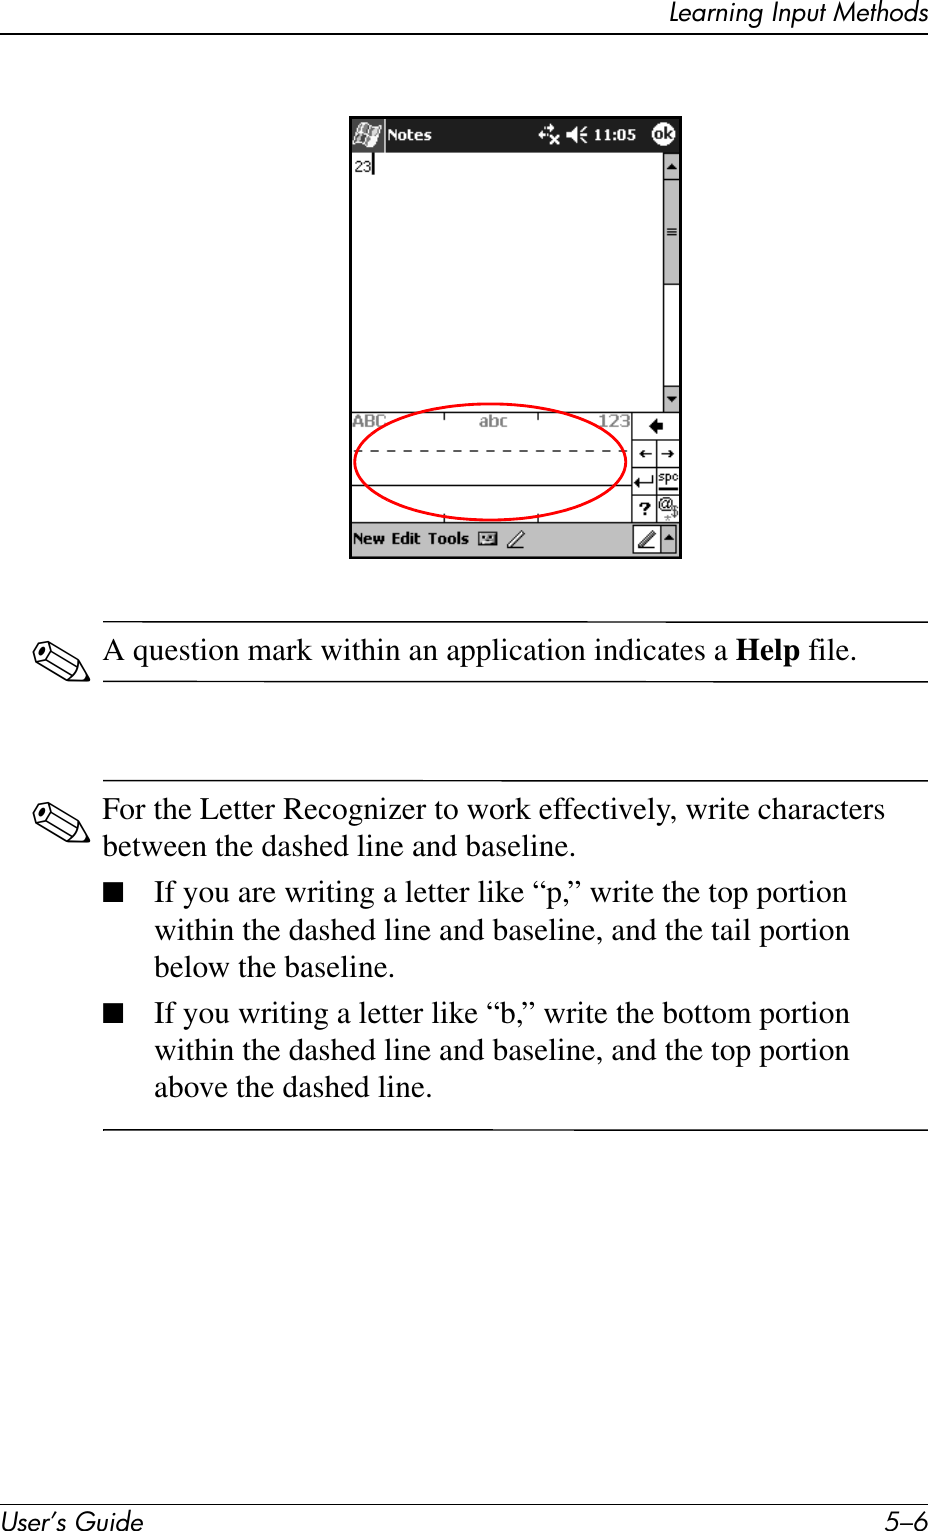 User’s Guide 5–6Learning Input Methods✎A question mark within an application indicates a Help file.✎For the Letter Recognizer to work effectively, write characters between the dashed line and baseline.■If you are writing a letter like “p,” write the top portion within the dashed line and baseline, and the tail portion below the baseline.■If you writing a letter like “b,” write the bottom portion within the dashed line and baseline, and the top portion above the dashed line.